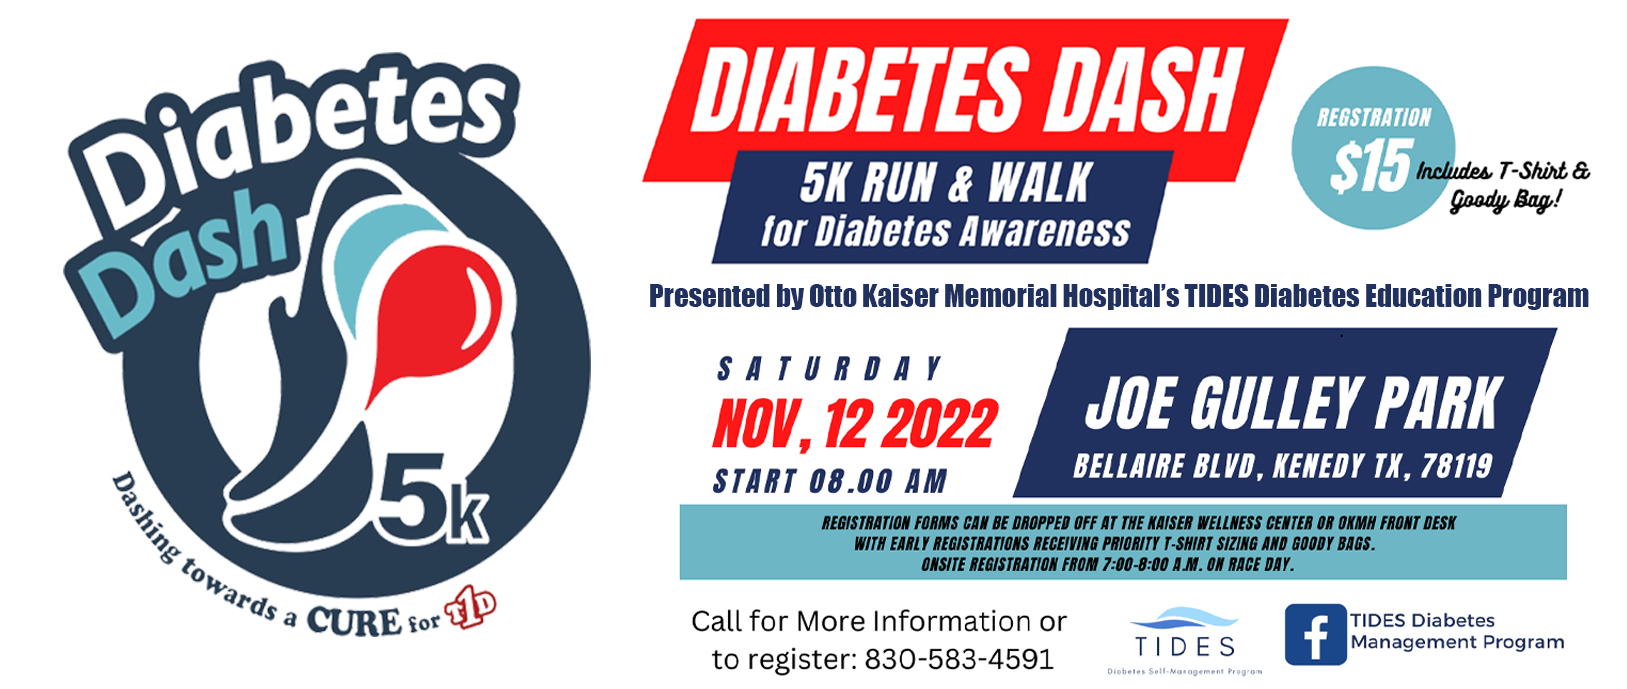 Diabetes Dash- Dashing towards a CURE for T1D

DIABETES DASH
5K RUN & WALK for Diabetes Awareness
Presented by Otto Kaiser Memorial Hospital's TIDES Diabetes Education Program
REGISTRATION $15 *Includes T-Shirt &. Goody Bag!
Presented by Otto Kaiser Memorial Hospital's TIDE Diabetes Education Program
Saturday NOV, 12 2022
Starts at 8:00 AM
JOE GULLEY PARK
BELLAIRE BLVD, KENEDY TX, 78119

*REGISTRATION FORMS CAN BE DROPPED OFF AT THE KAISER CENTER WELLNESS CENTER OR OKMH FRONT DESK WITH EARLY REGISTRATIONS RECEIVING PRIORITY T-SHIRT SIZING AND GOODY BAGS.
ONSITE REGISTRATION FROM 7:00-8:00 A.M. ON RACE DAY.

Call for More information or to register:
830-583-4591
T I D E S
Diabetes Self-Management Program
(f) facebook - TIDES Diabetes Management Program